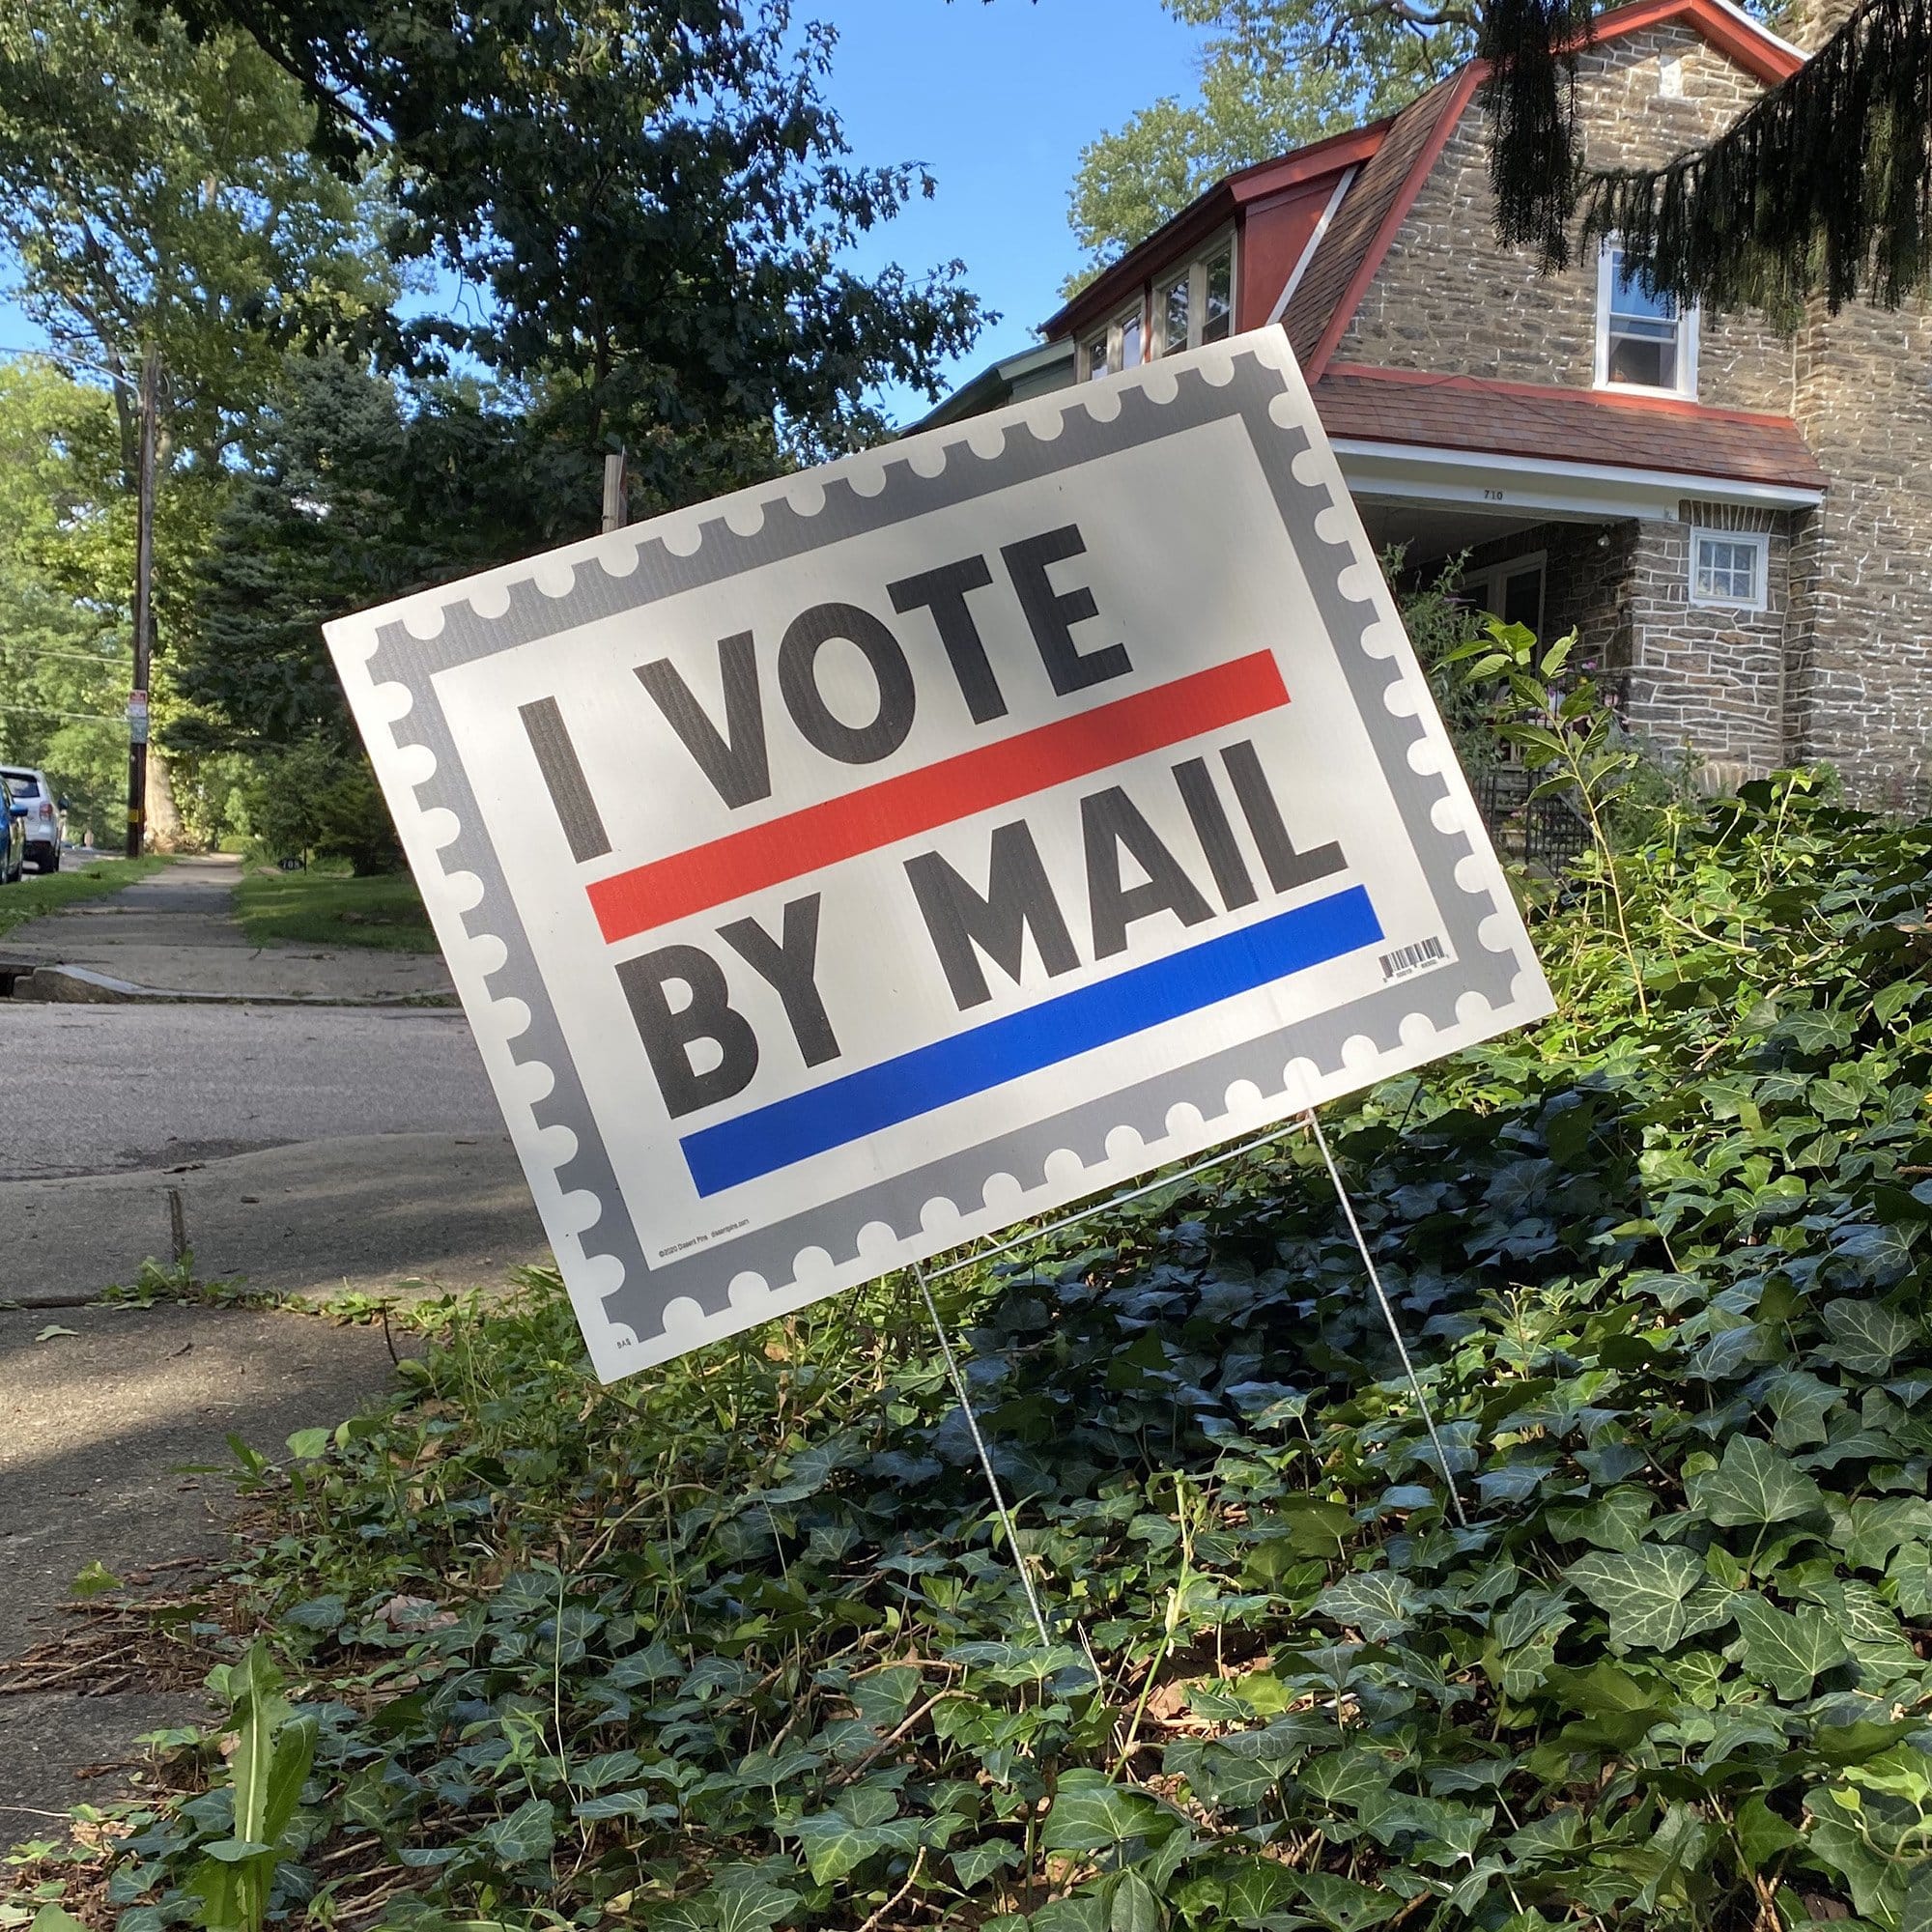 I Voted by Mail Yard Sign